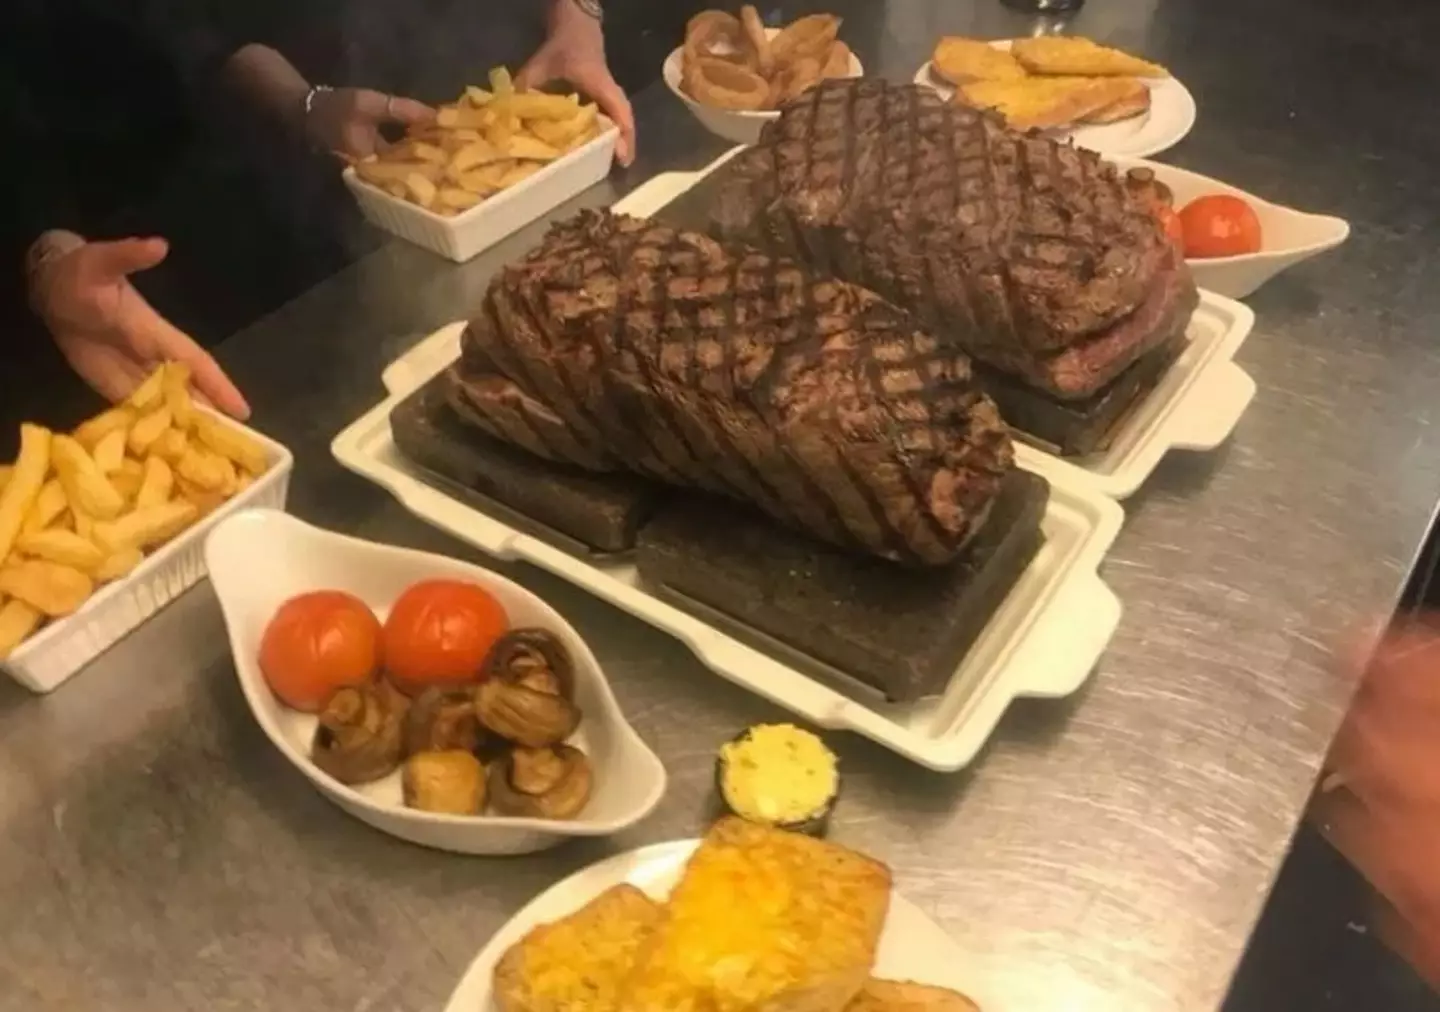 A four person steak challenge needs you and three mates to eat 200oz of steak and sides in an hour.